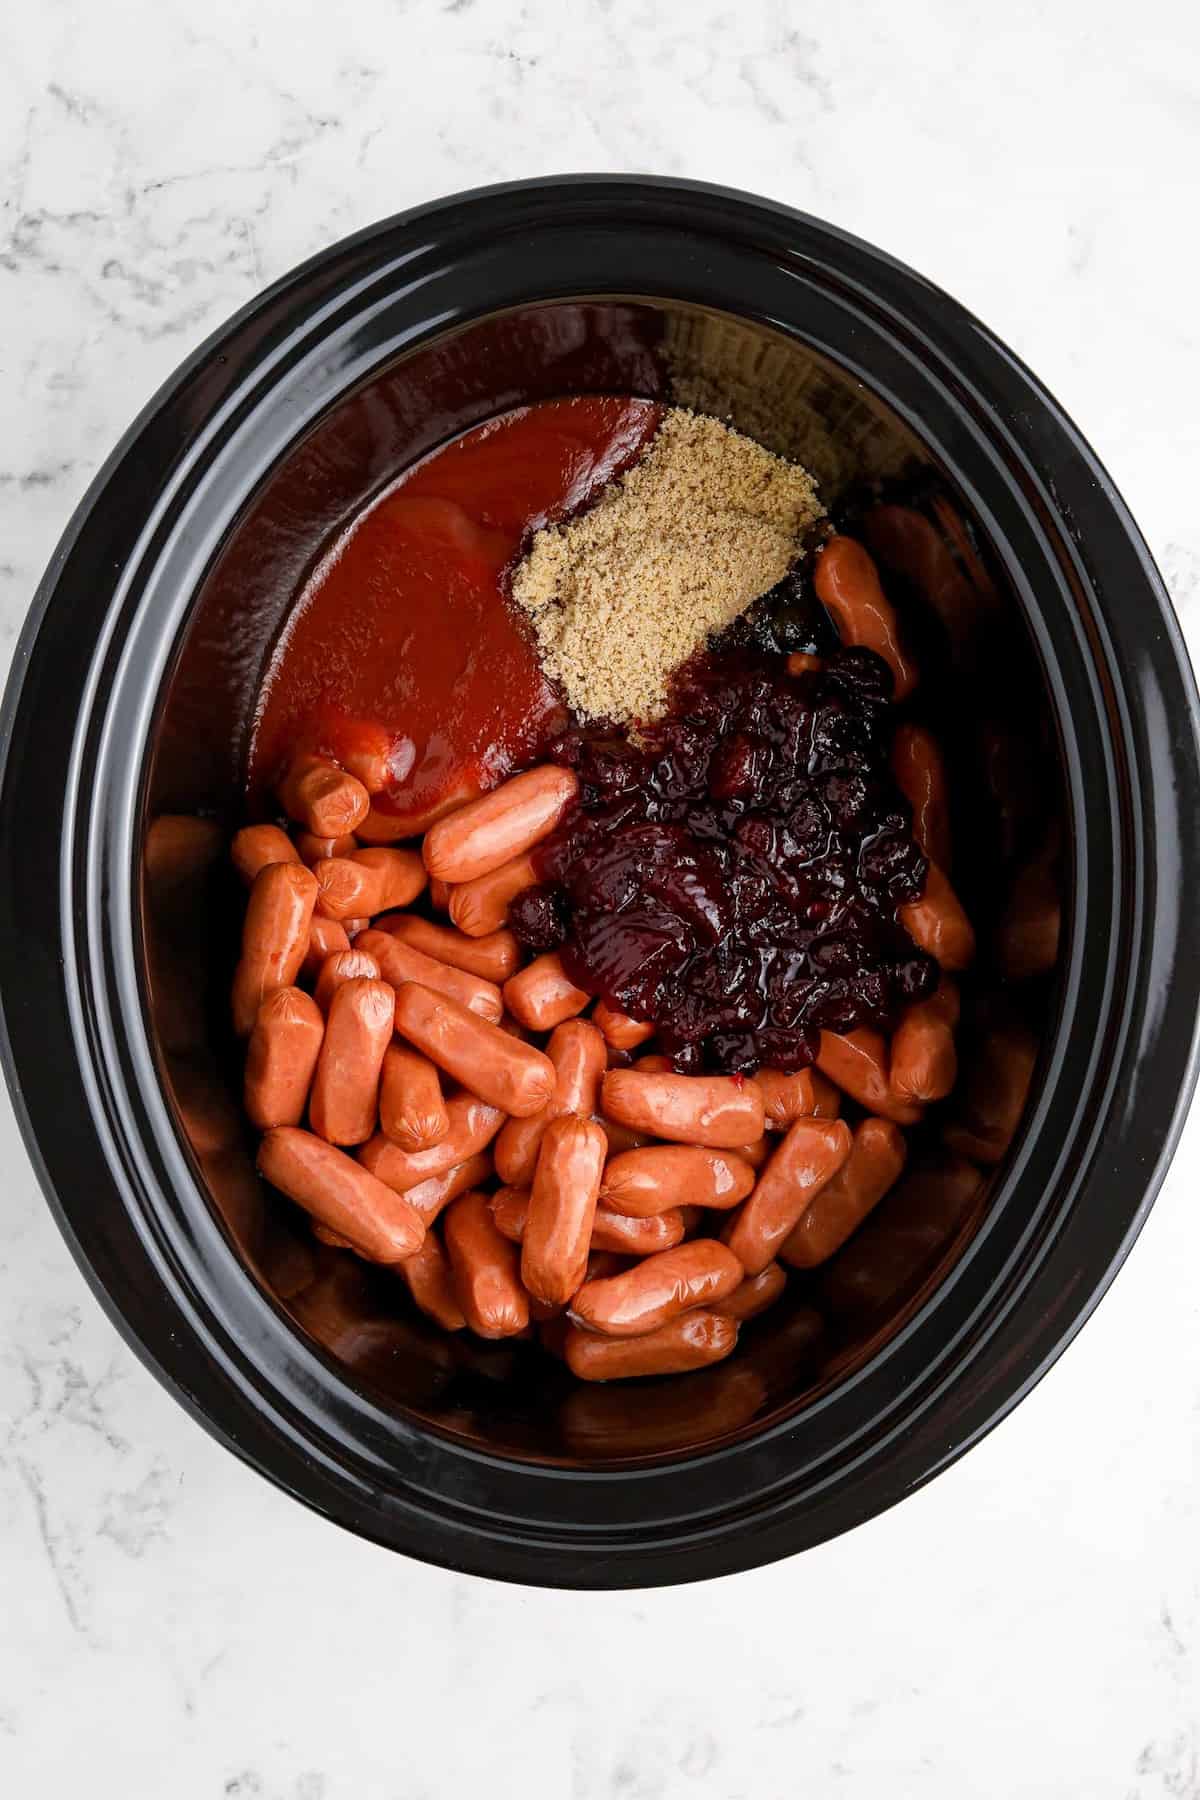 Ingredients for slow cooker cranberry little smokies in a crockpot.